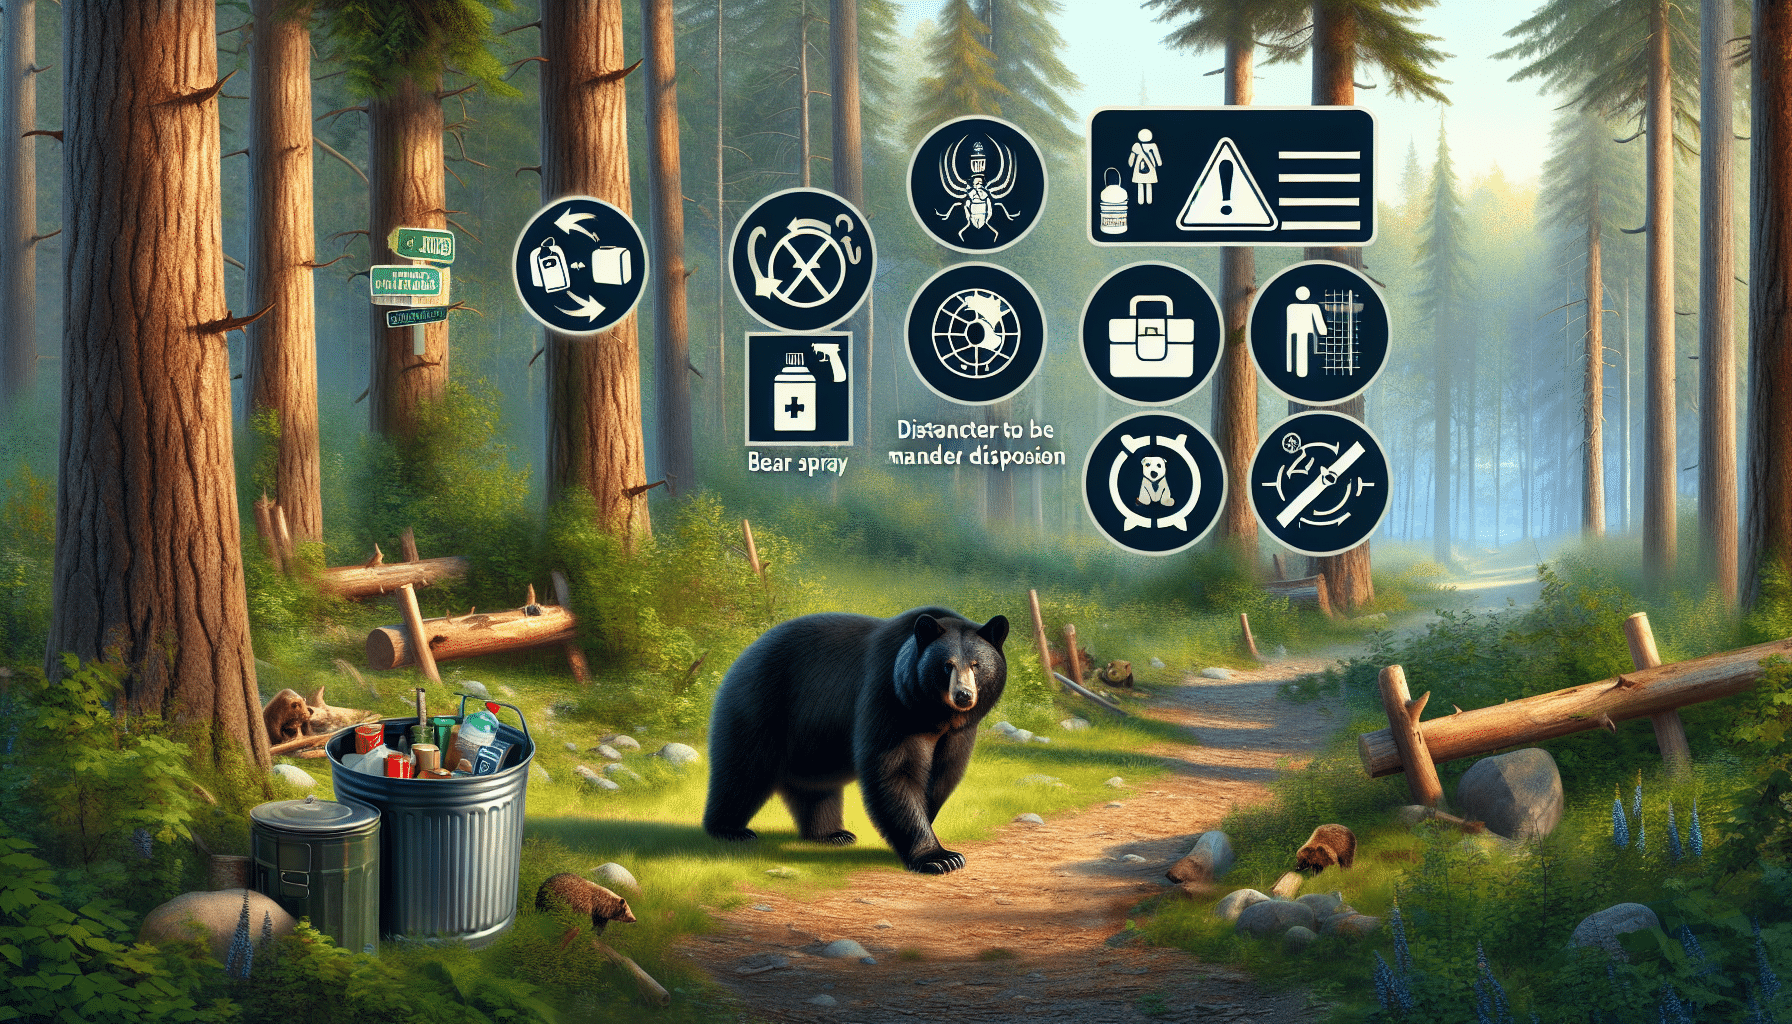 A picturesque woodland scene highlighting a black bear in its natural habitat. The bear calmly stands on a forest path, alert and studying its surroundings. Nearby, informatics symbols, such as safety sign or caution symbol, subtly hint at bear-proof strategies, like the proper garbage disposal and the distance to be maintained from the wild creature. Items like bear spray and a secure food storage container suggest ways to handle encounters, but without any labeling or text. Render the image in vivid and realistic style without including any human presence.